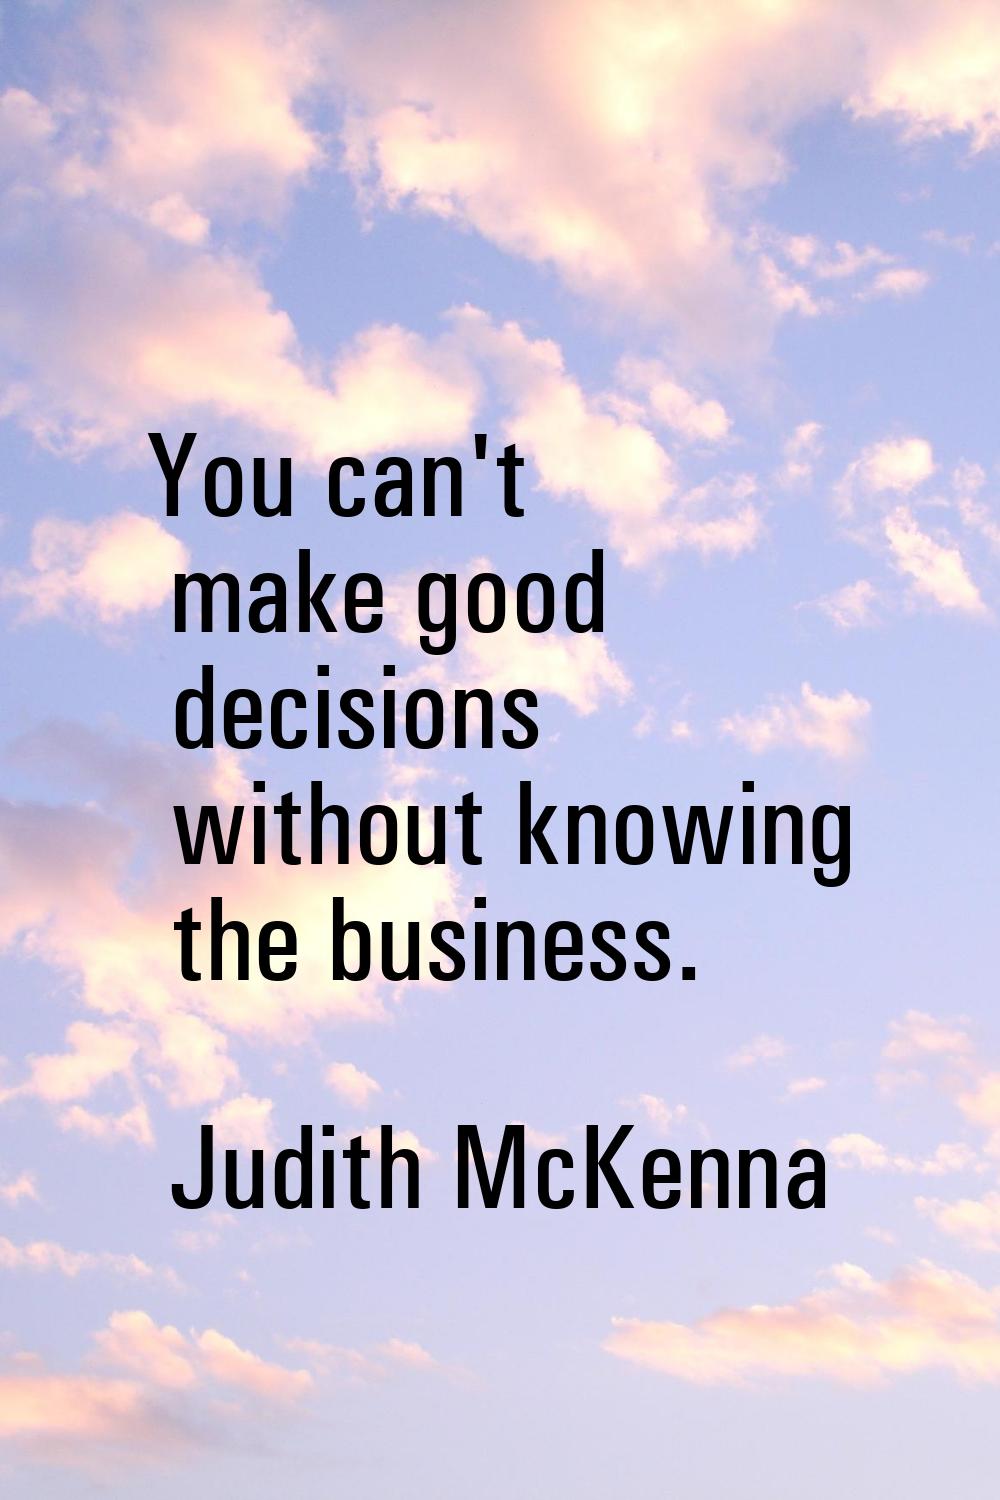 You can't make good decisions without knowing the business.